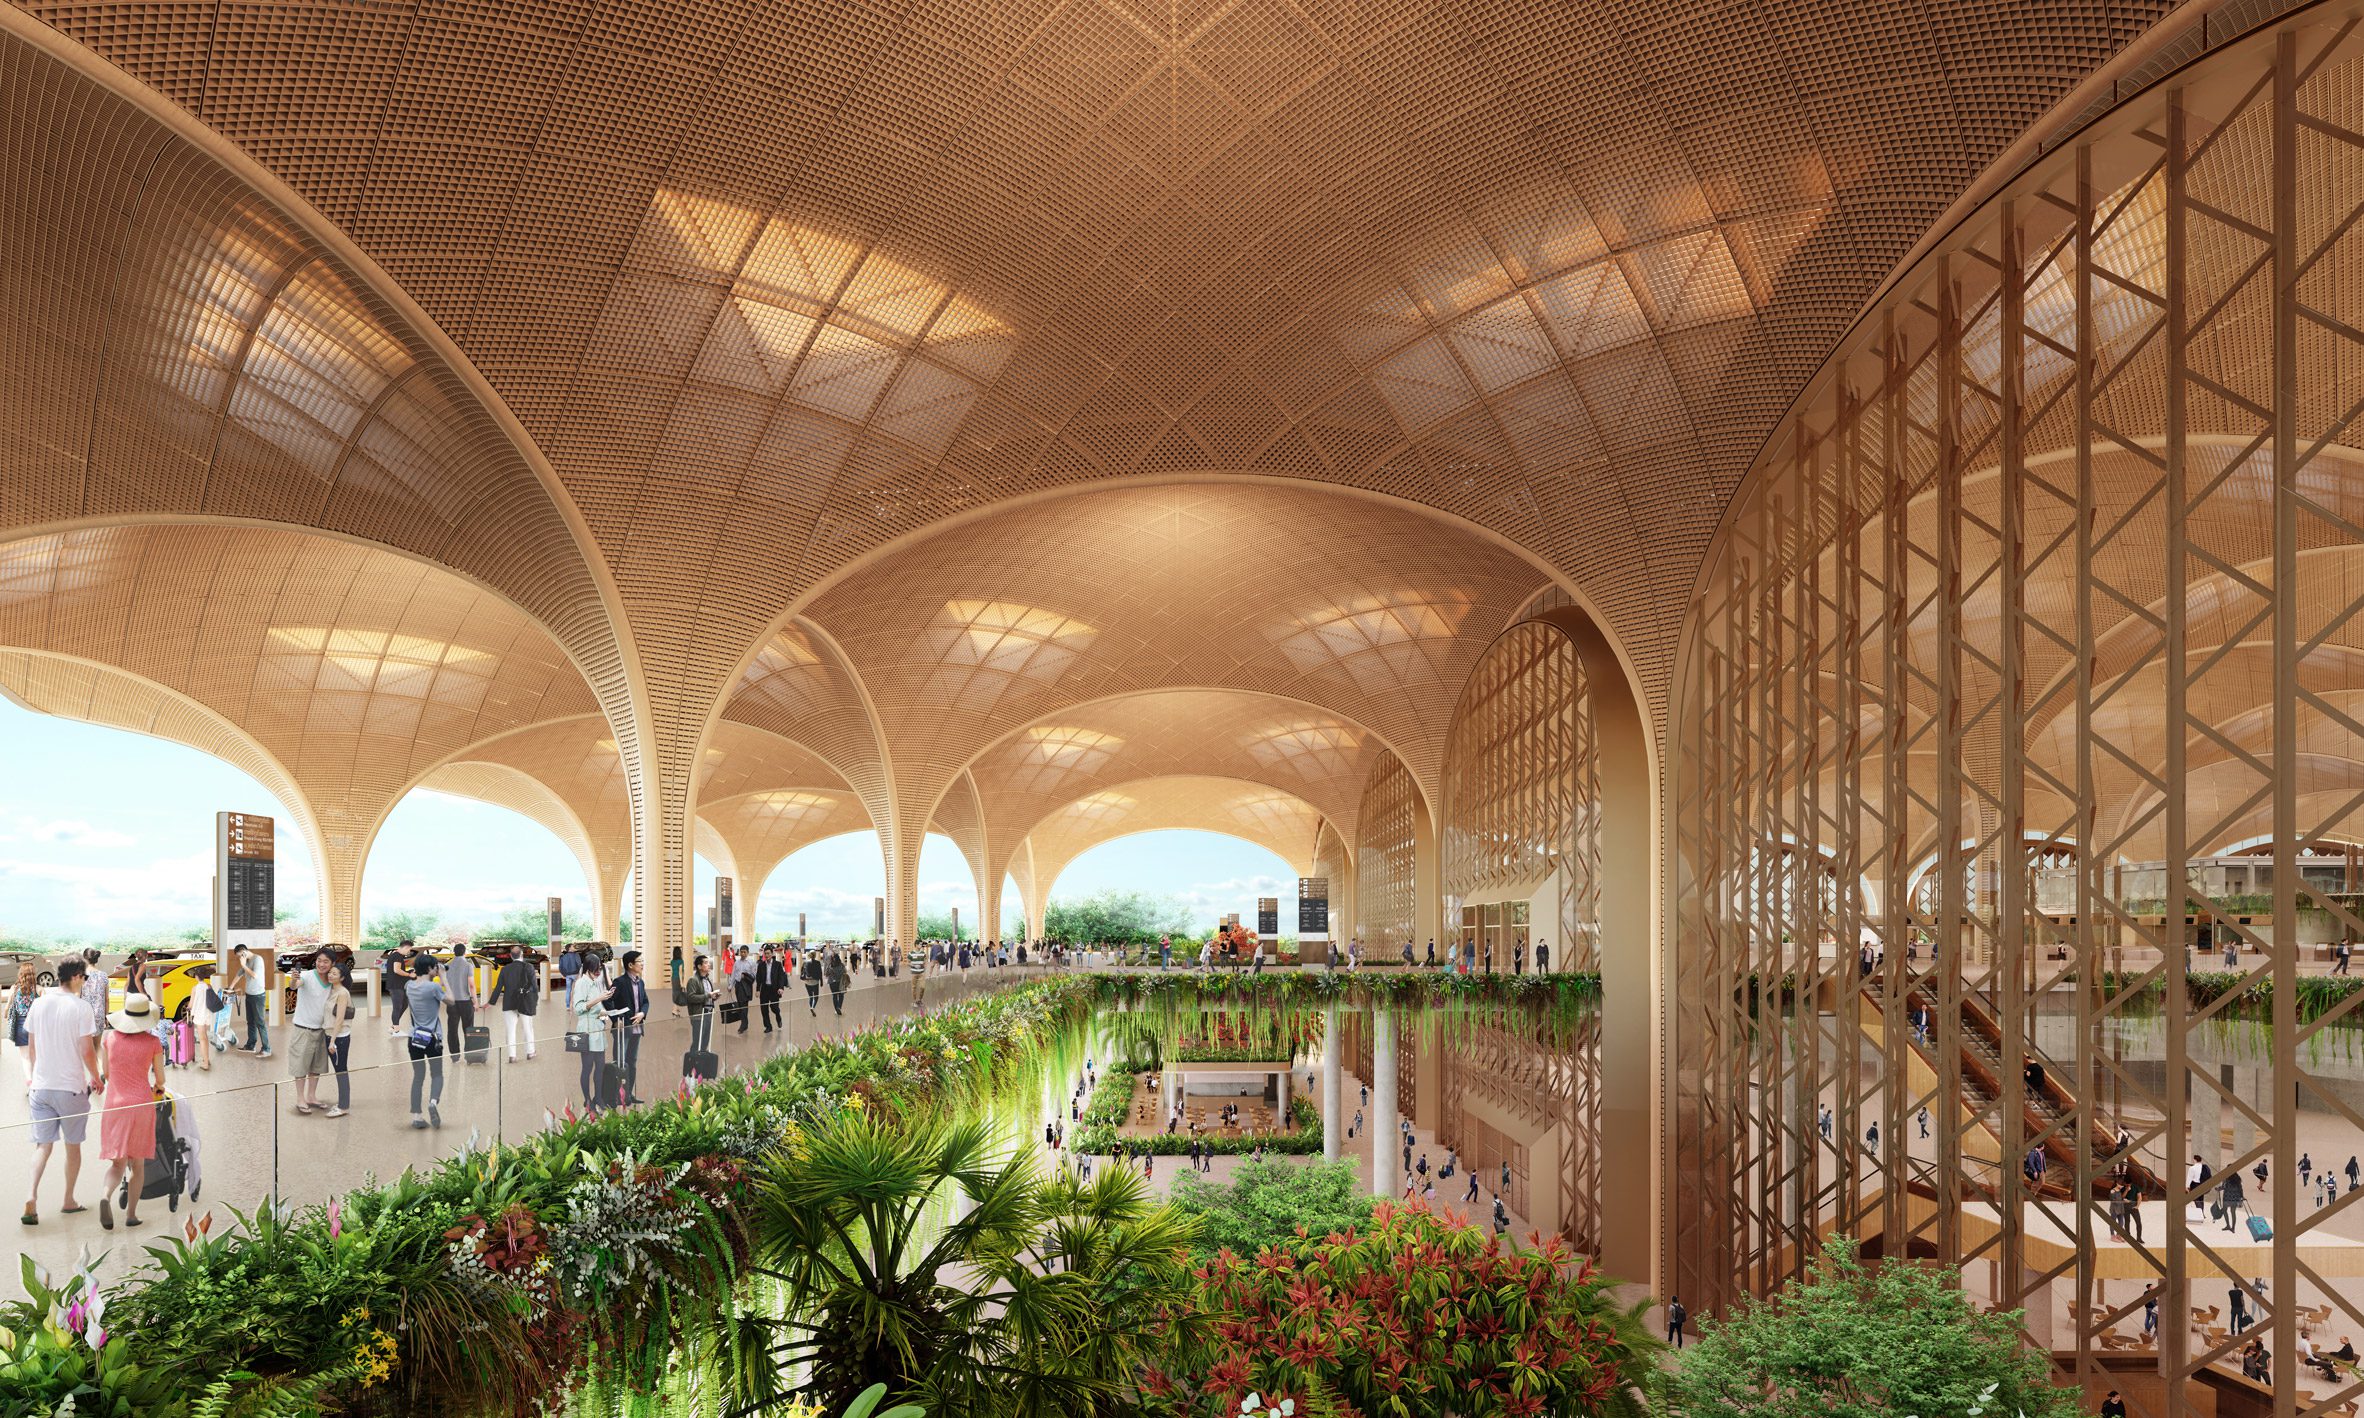 Planting and grid shell roof at Techo International Airport in Cambodia by Foster + Partners